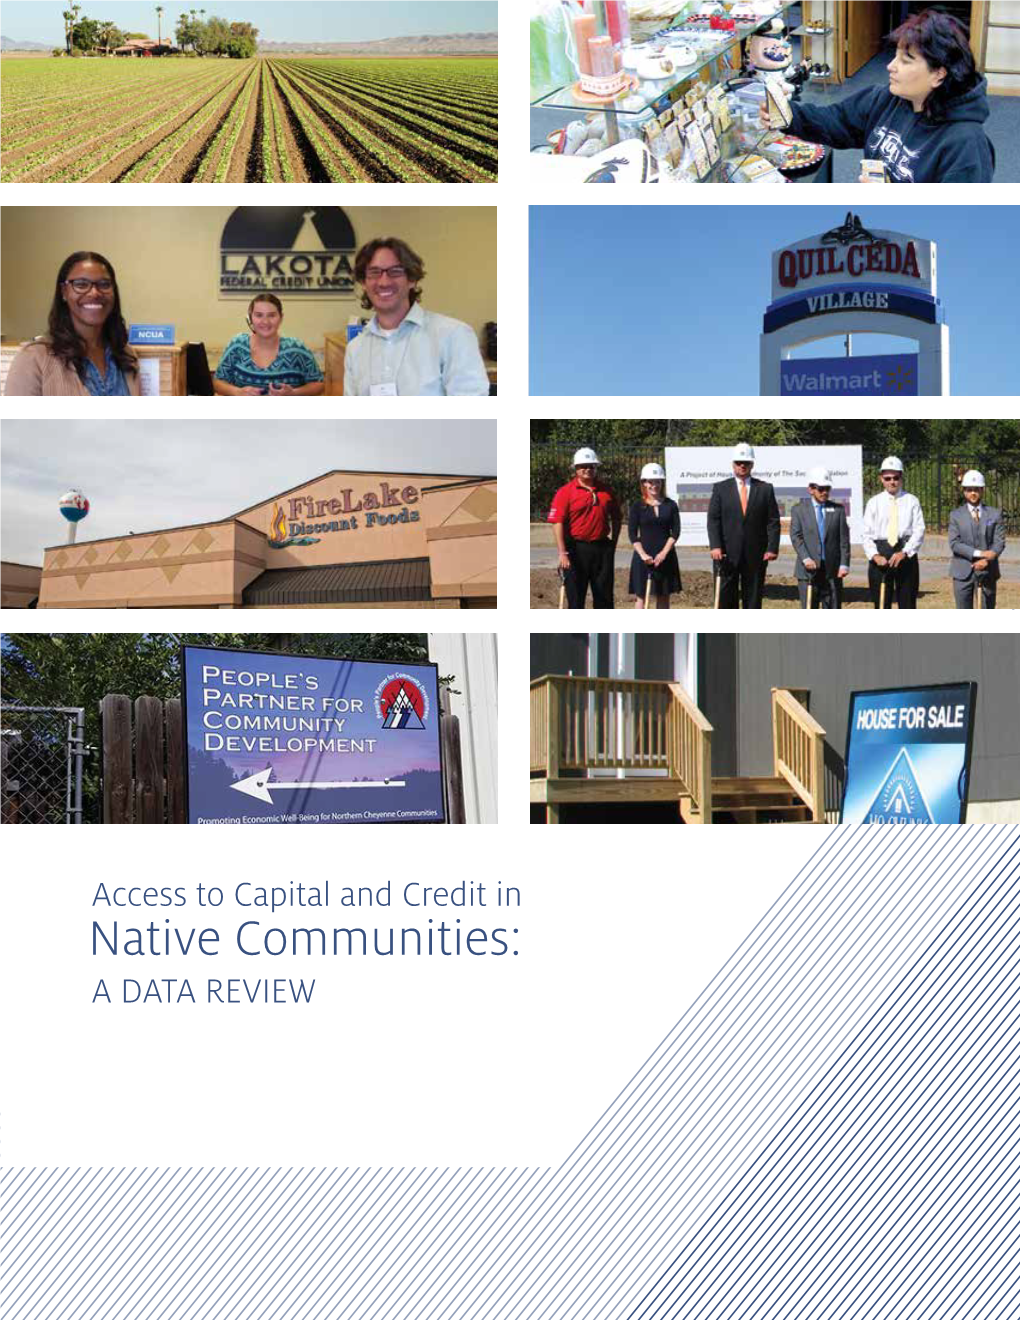 Access to Capital and Credit in Native Communities: a DATA REVIEW REVIEW Access to Capital and Credit in Native Communities: a Data Review